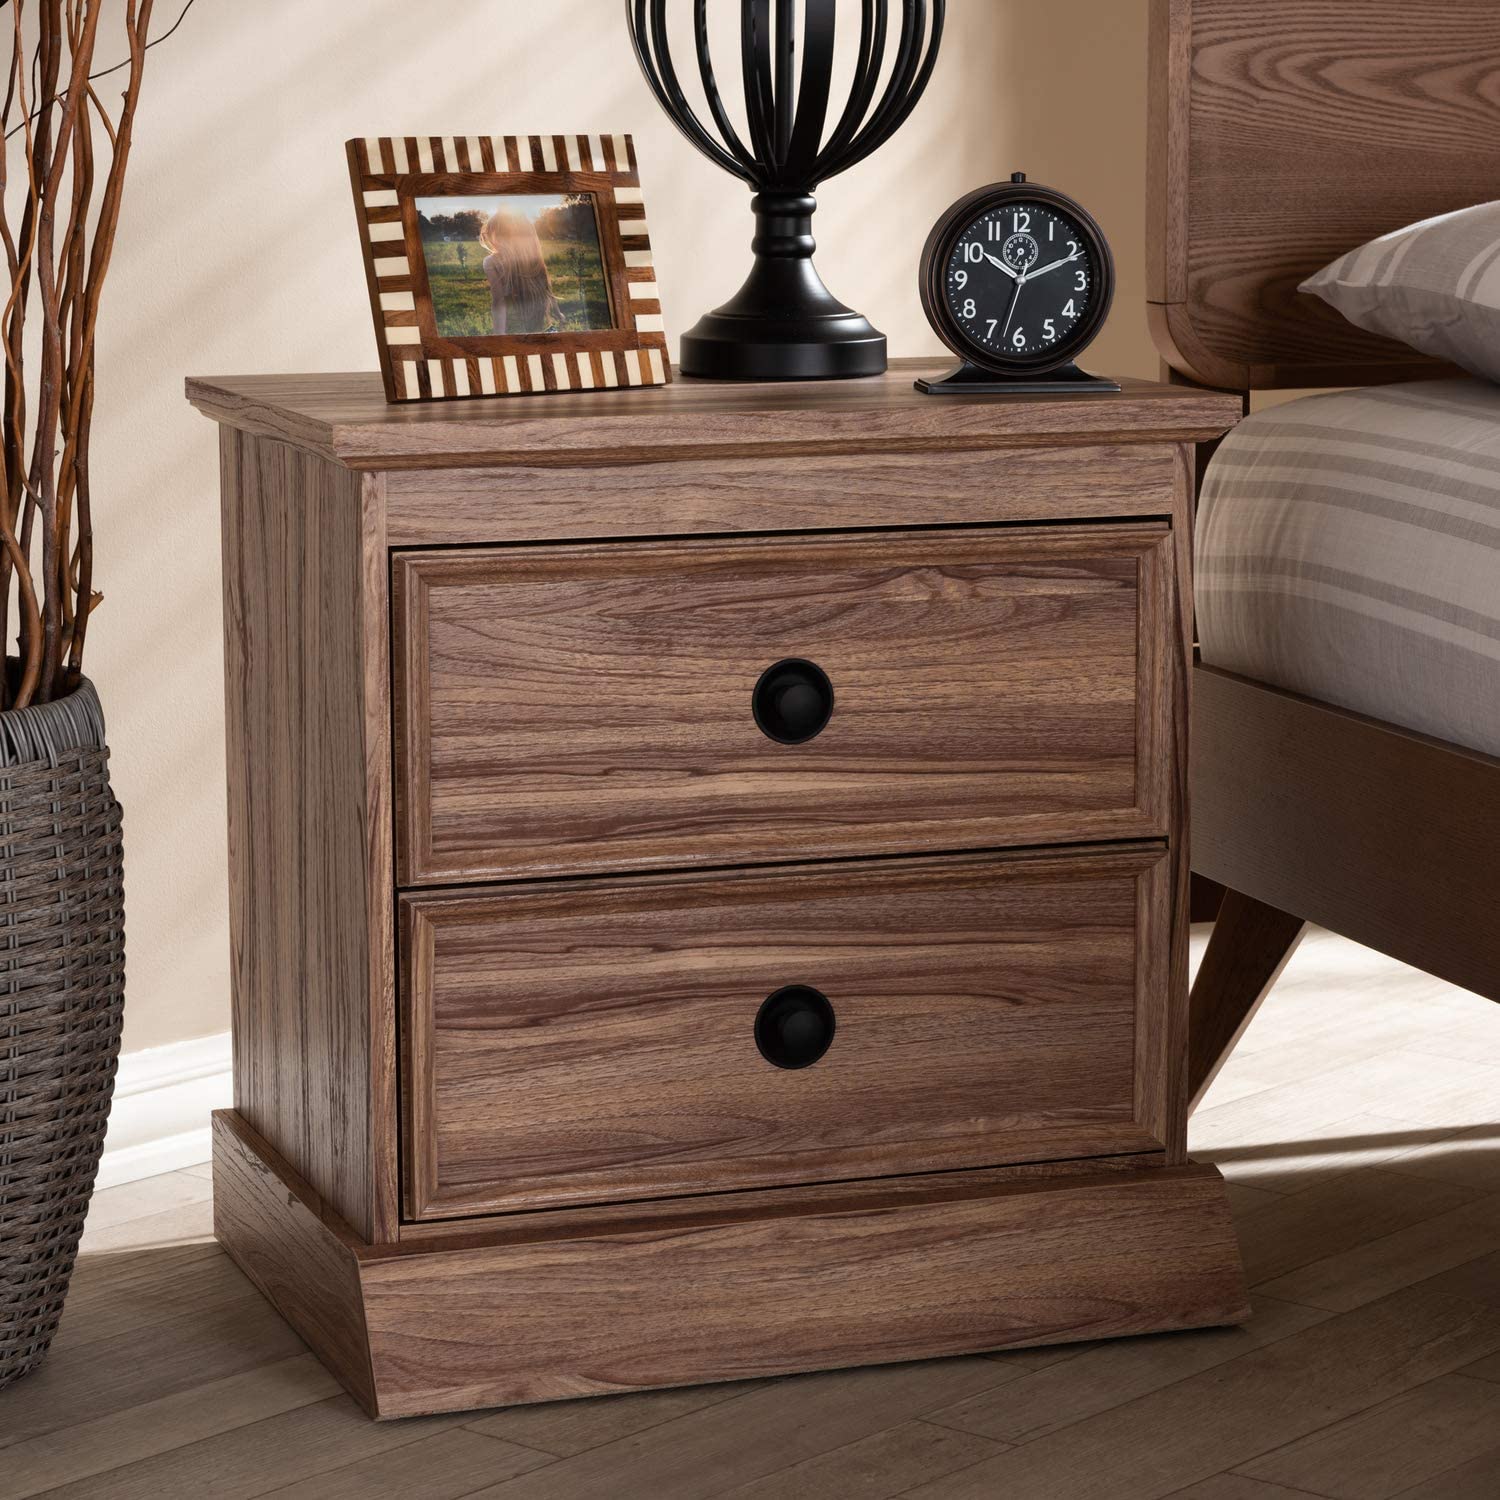 Baxton Studio Ryker Modern and Contemporary Oak Finished 2-Drawer Wood Nightstand